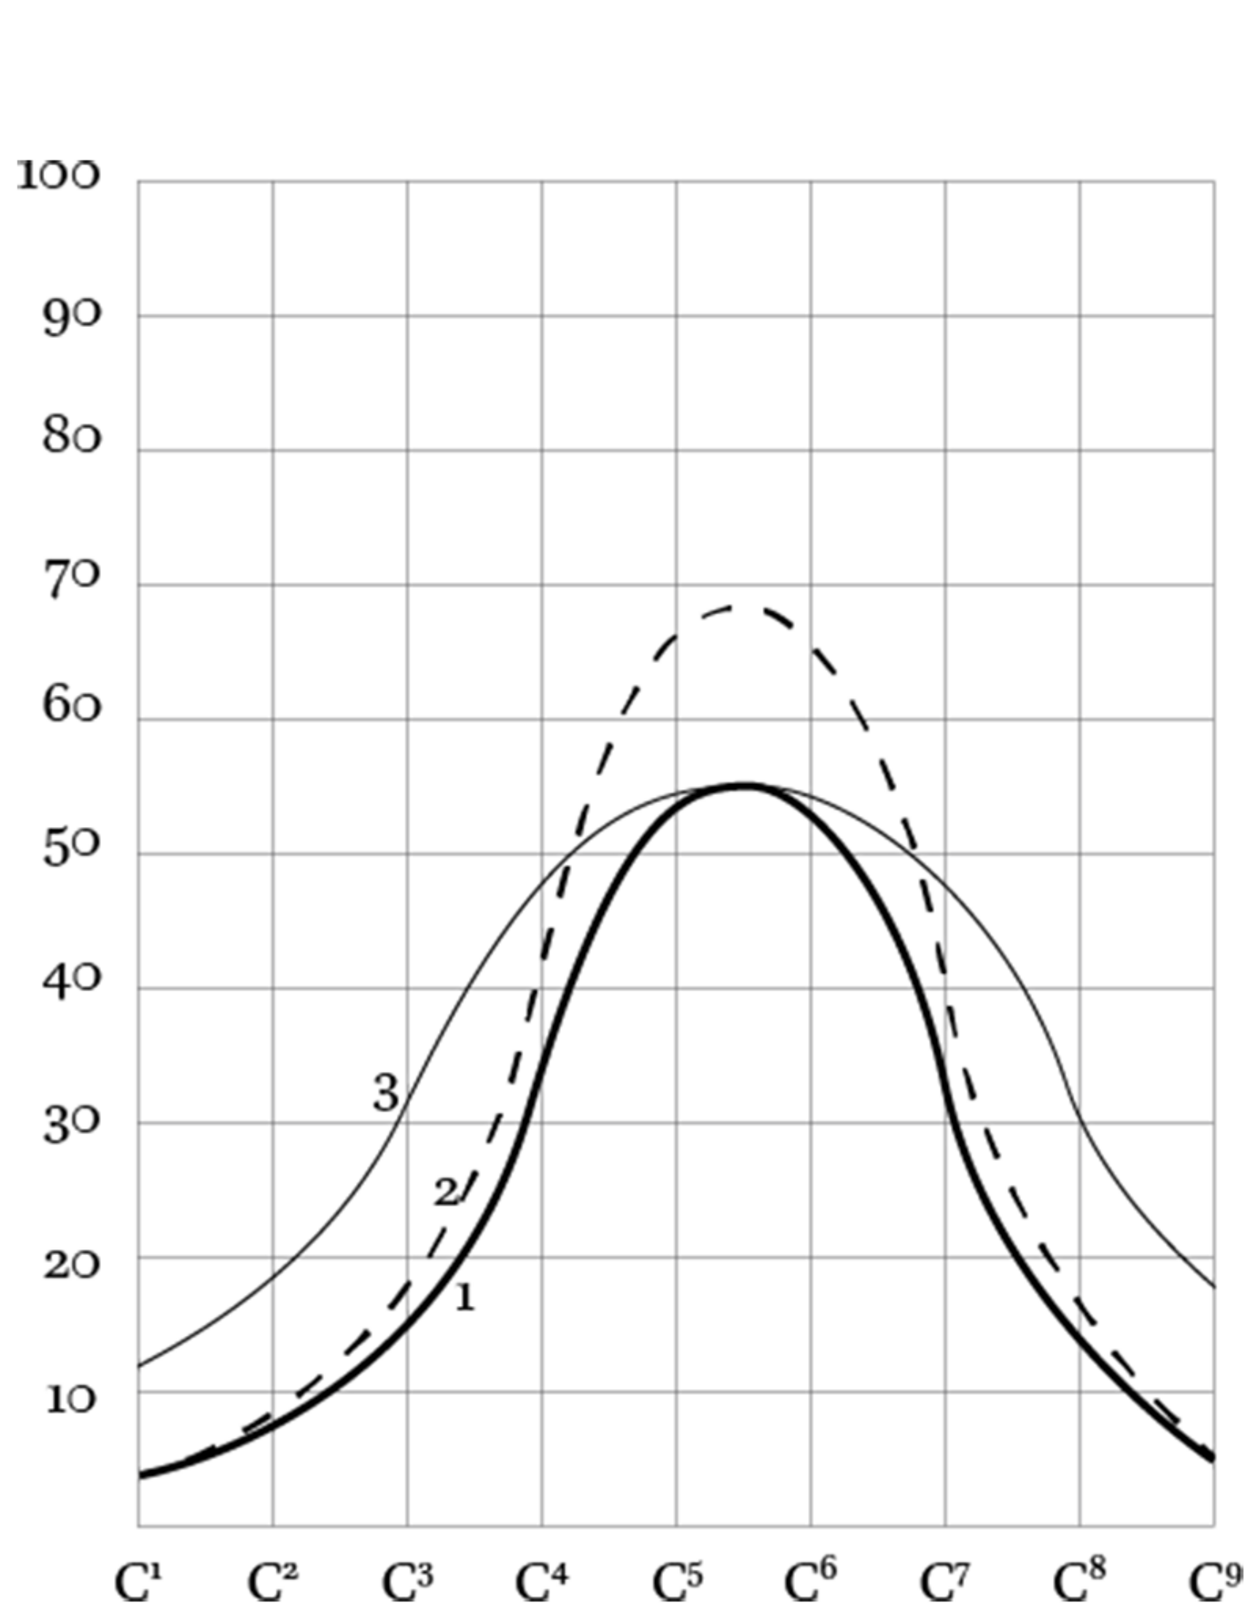 Absorptive power of formula variations. The letters at the bottom indicate octave intervals of pitch. Line 1 shows the absorptiv